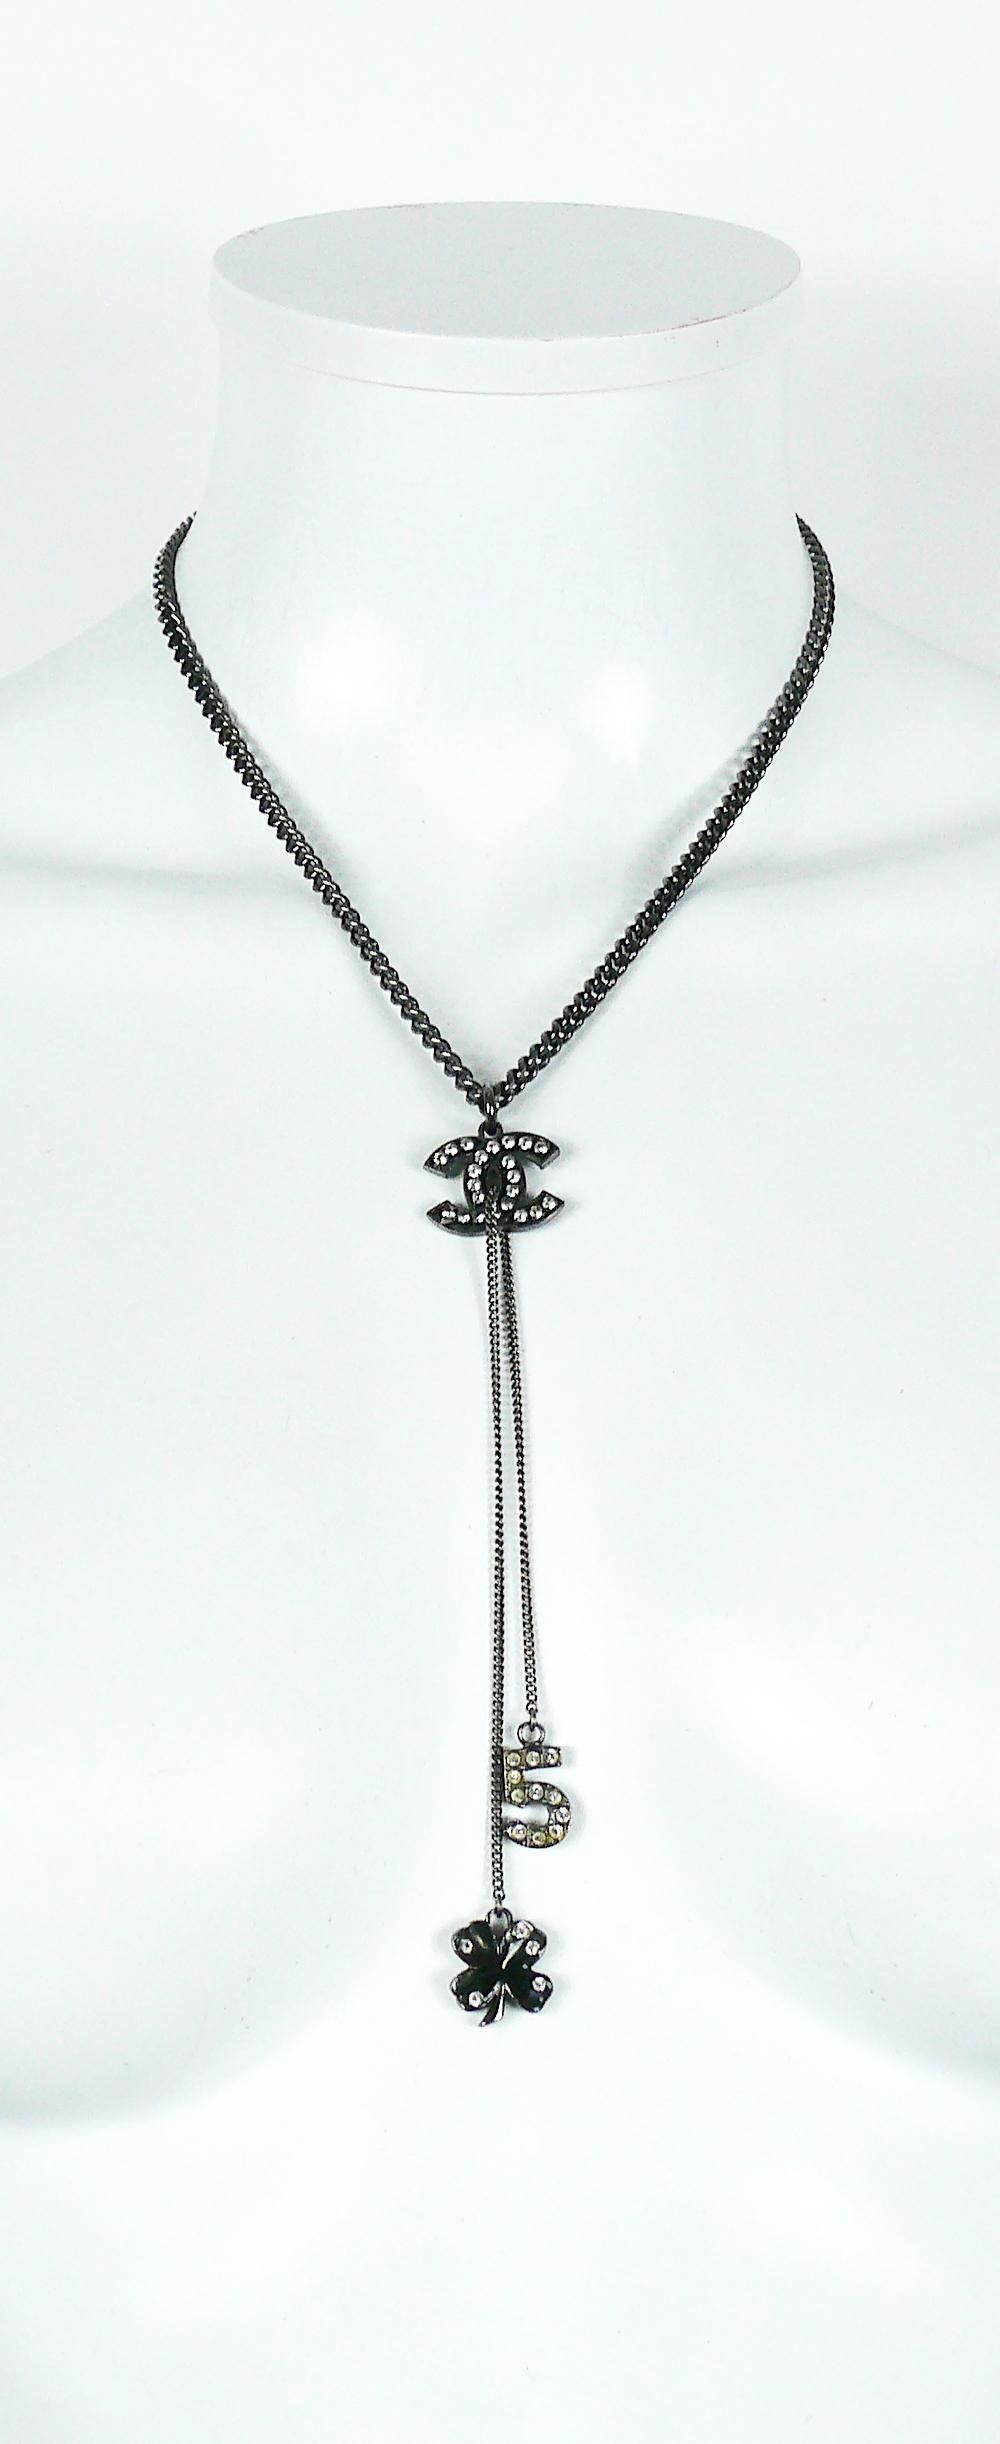 CHANEL ruthenium chain necklace featuring a CC pendant embellished with clear crystals, N°5 and clover charms.

T bar closure.

Fall 2003 Collection.

Embossed CHANEL 03 A Made in France.

Indicative measurements : chain length approx. 45 cm (17.72